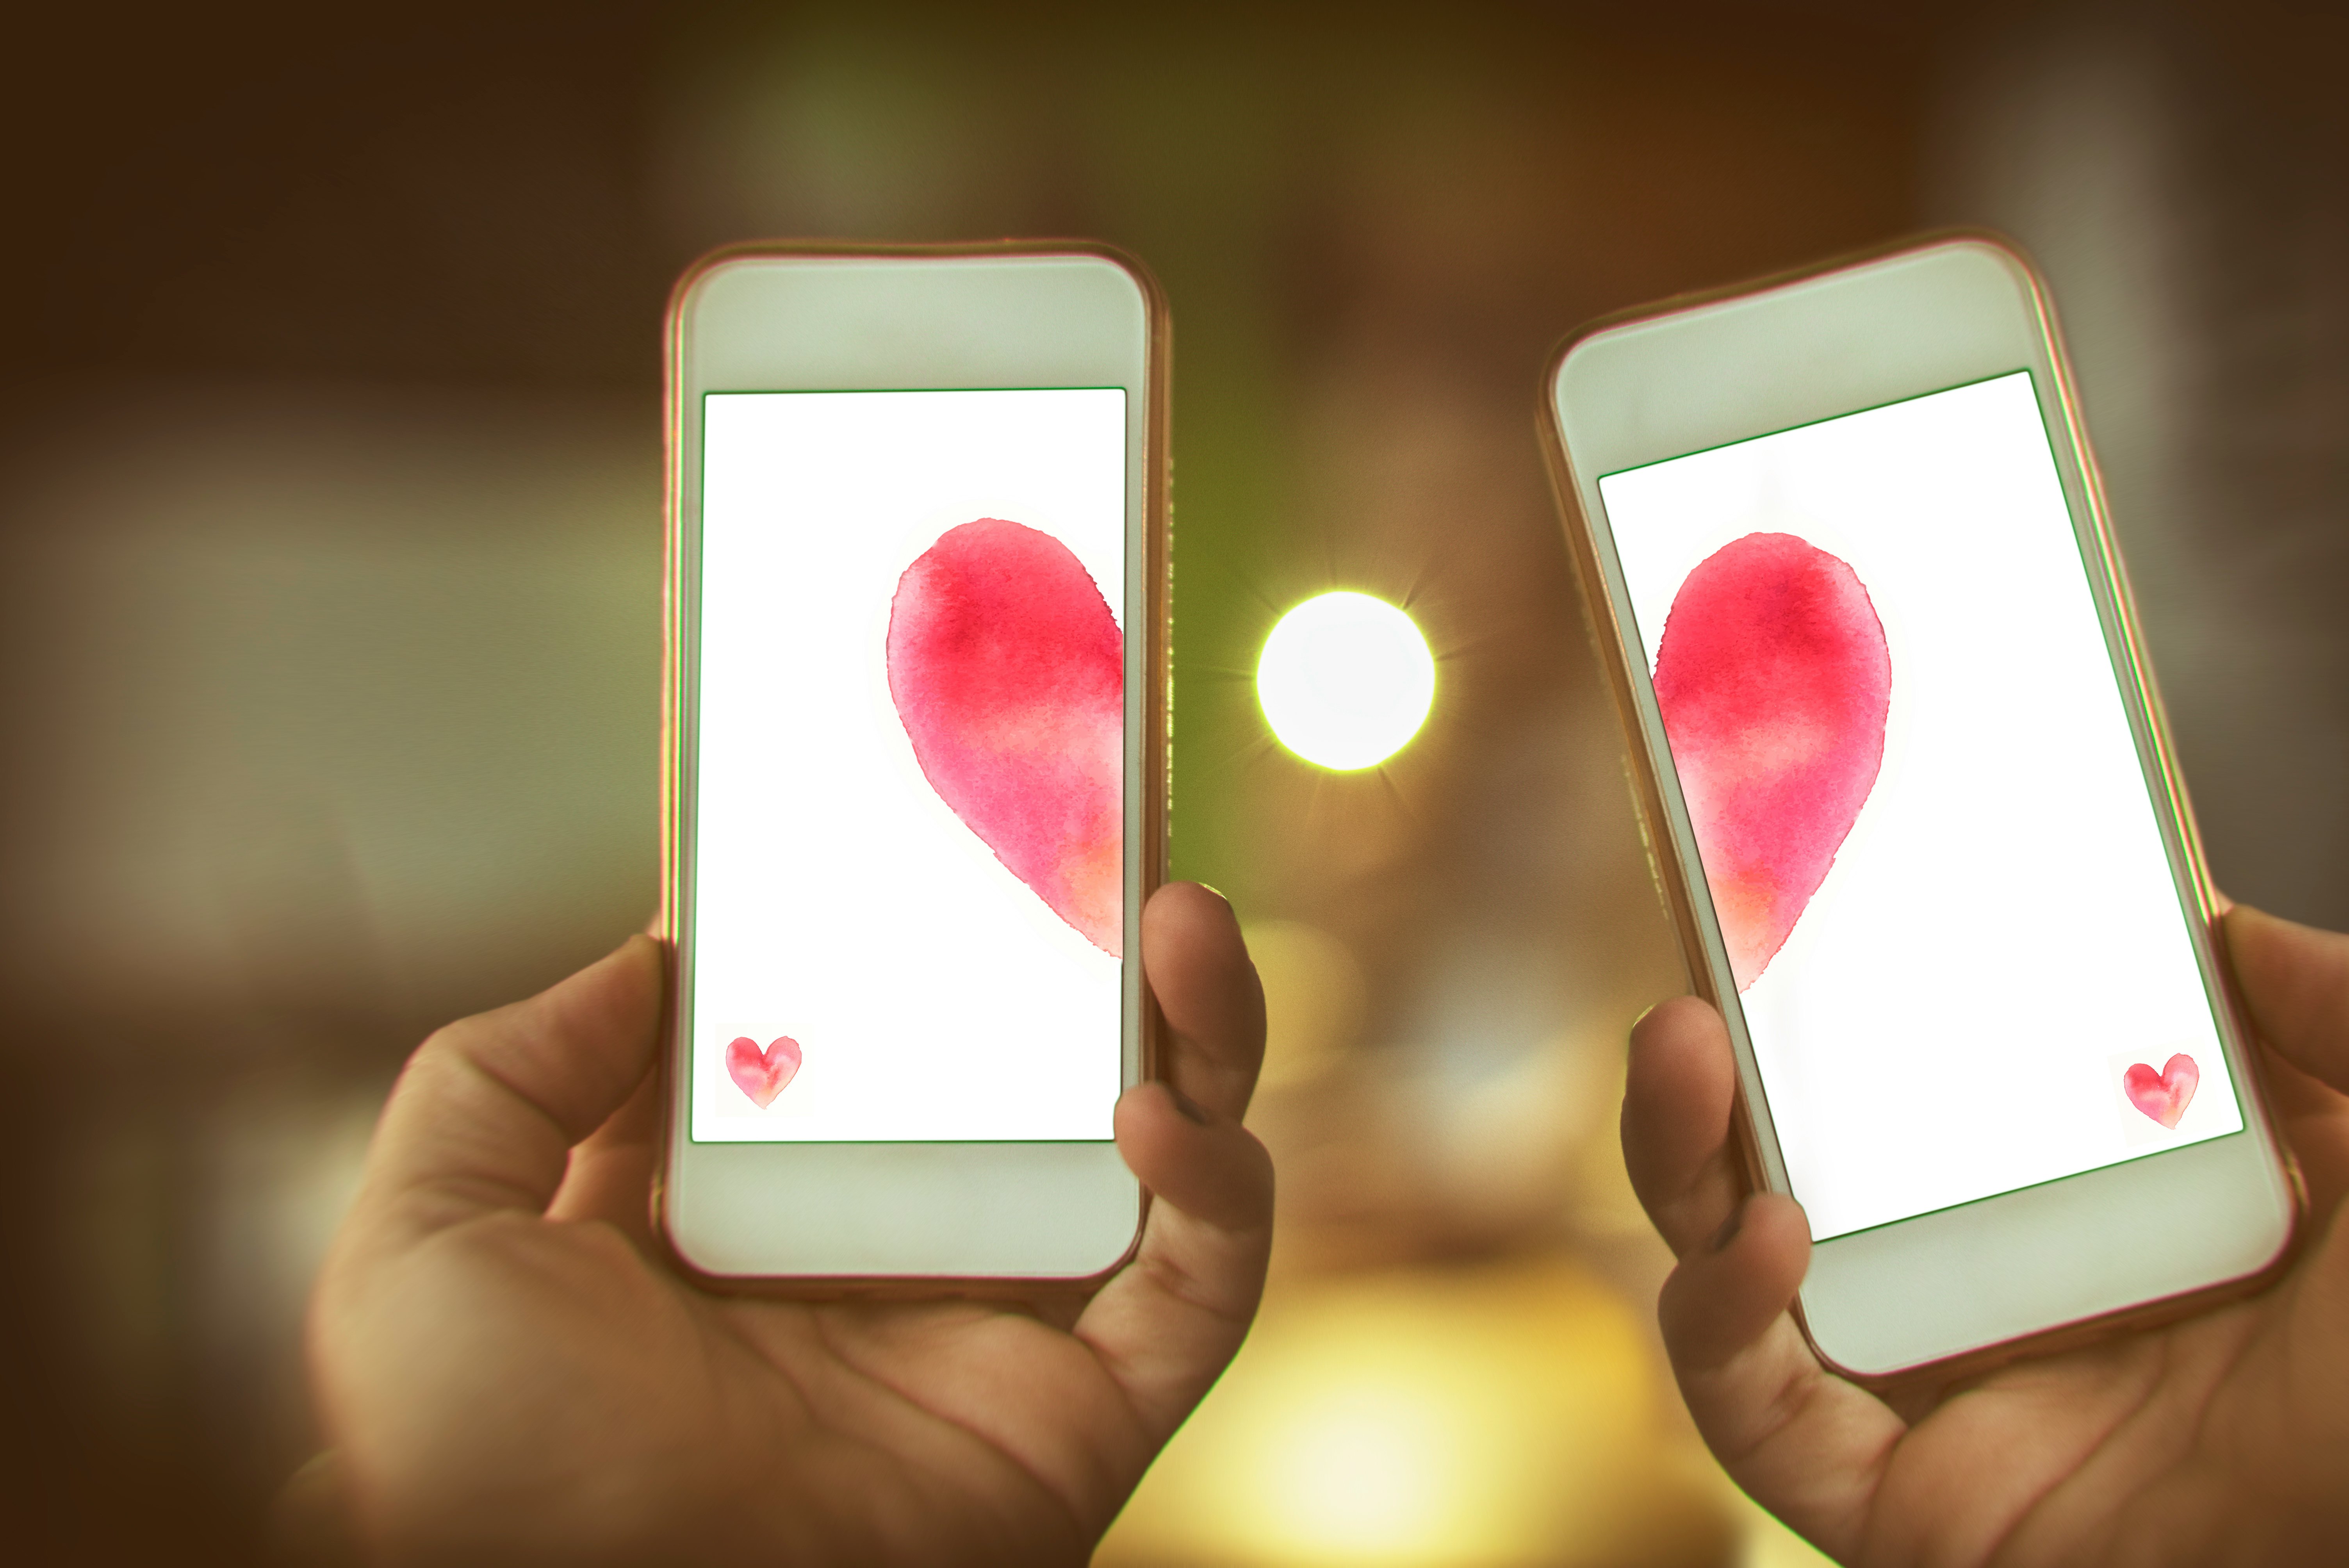 TOP TEN BEST VALENTINES DAY WALLPAPERS FOR IPHONE X AND IPHONE 11  ハートの壁紙  バラの壁紙 壁紙